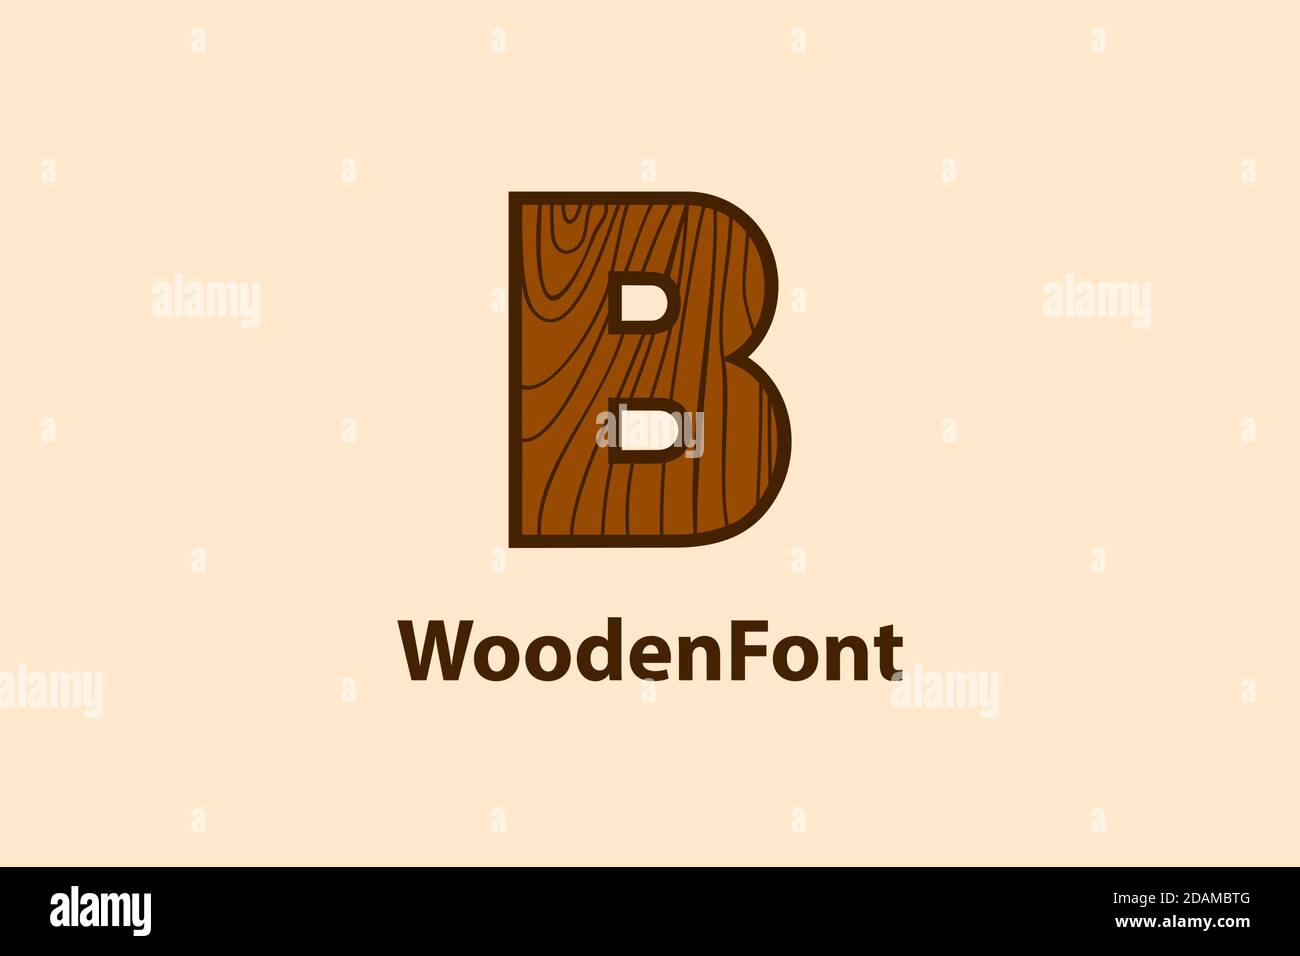 Abstract letter B logo with wood grain texture design concept. modern and creative logo design. Stock Vector